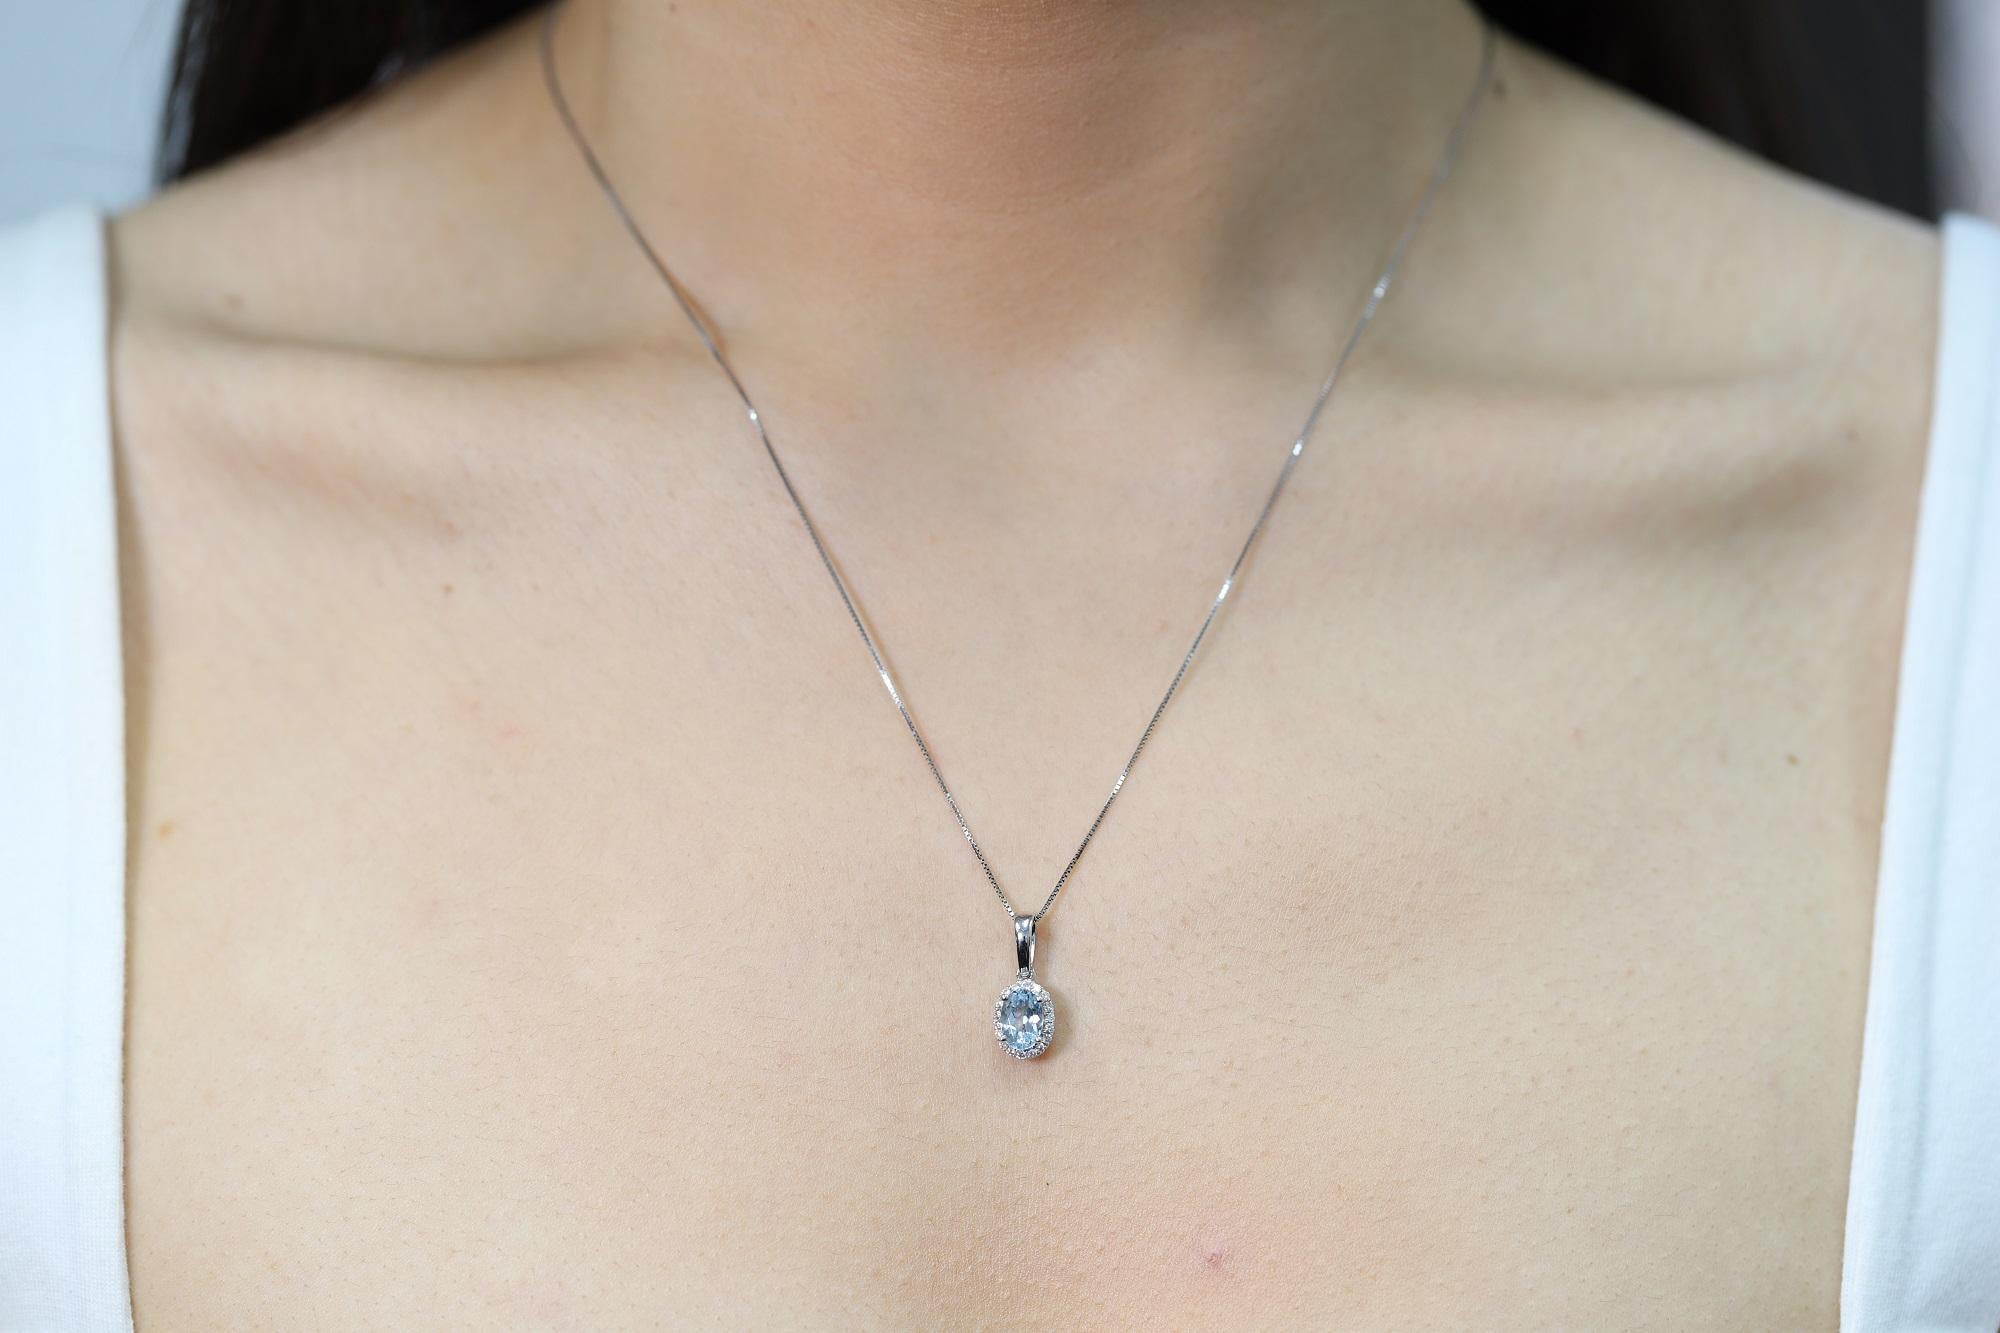 Decorate yourself in elegance with this Pendant is crafted from 10-karat White Gold by Gin & Grace Pendant. This Pendant is made up of 5X7 Oval-Cut Prong setting Genuine Aquamarine (1 Pcs) 0.76 Carat and Round-Cut Prong setting Natural White Diamond